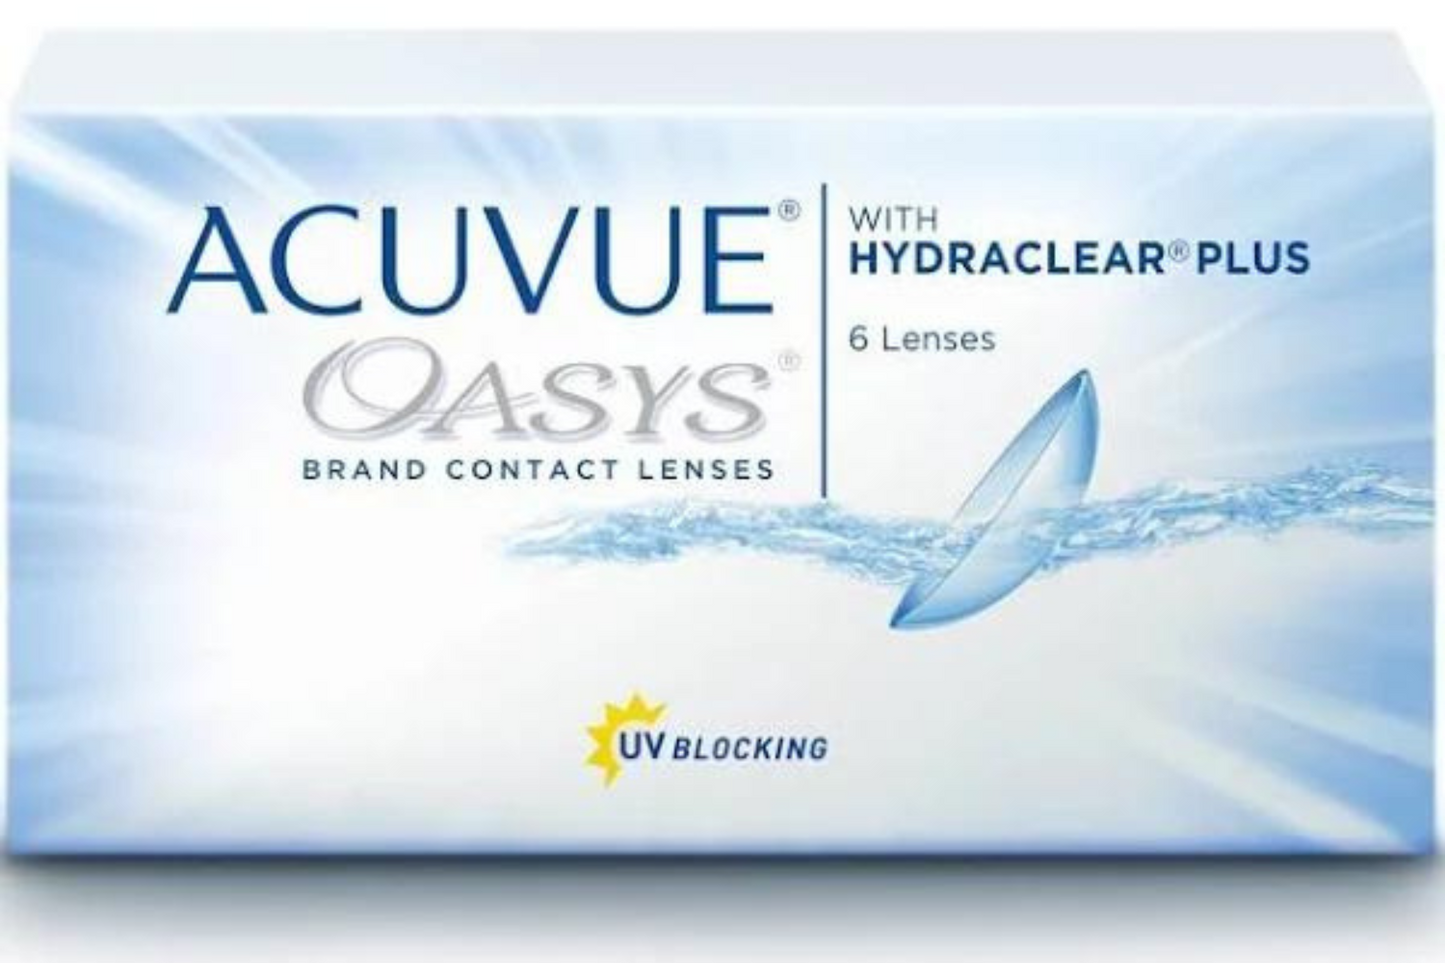 Johnson & Johnson Contact Lenses Acuvue Oasys With Hydraclear Plus (6 Lenses Box)